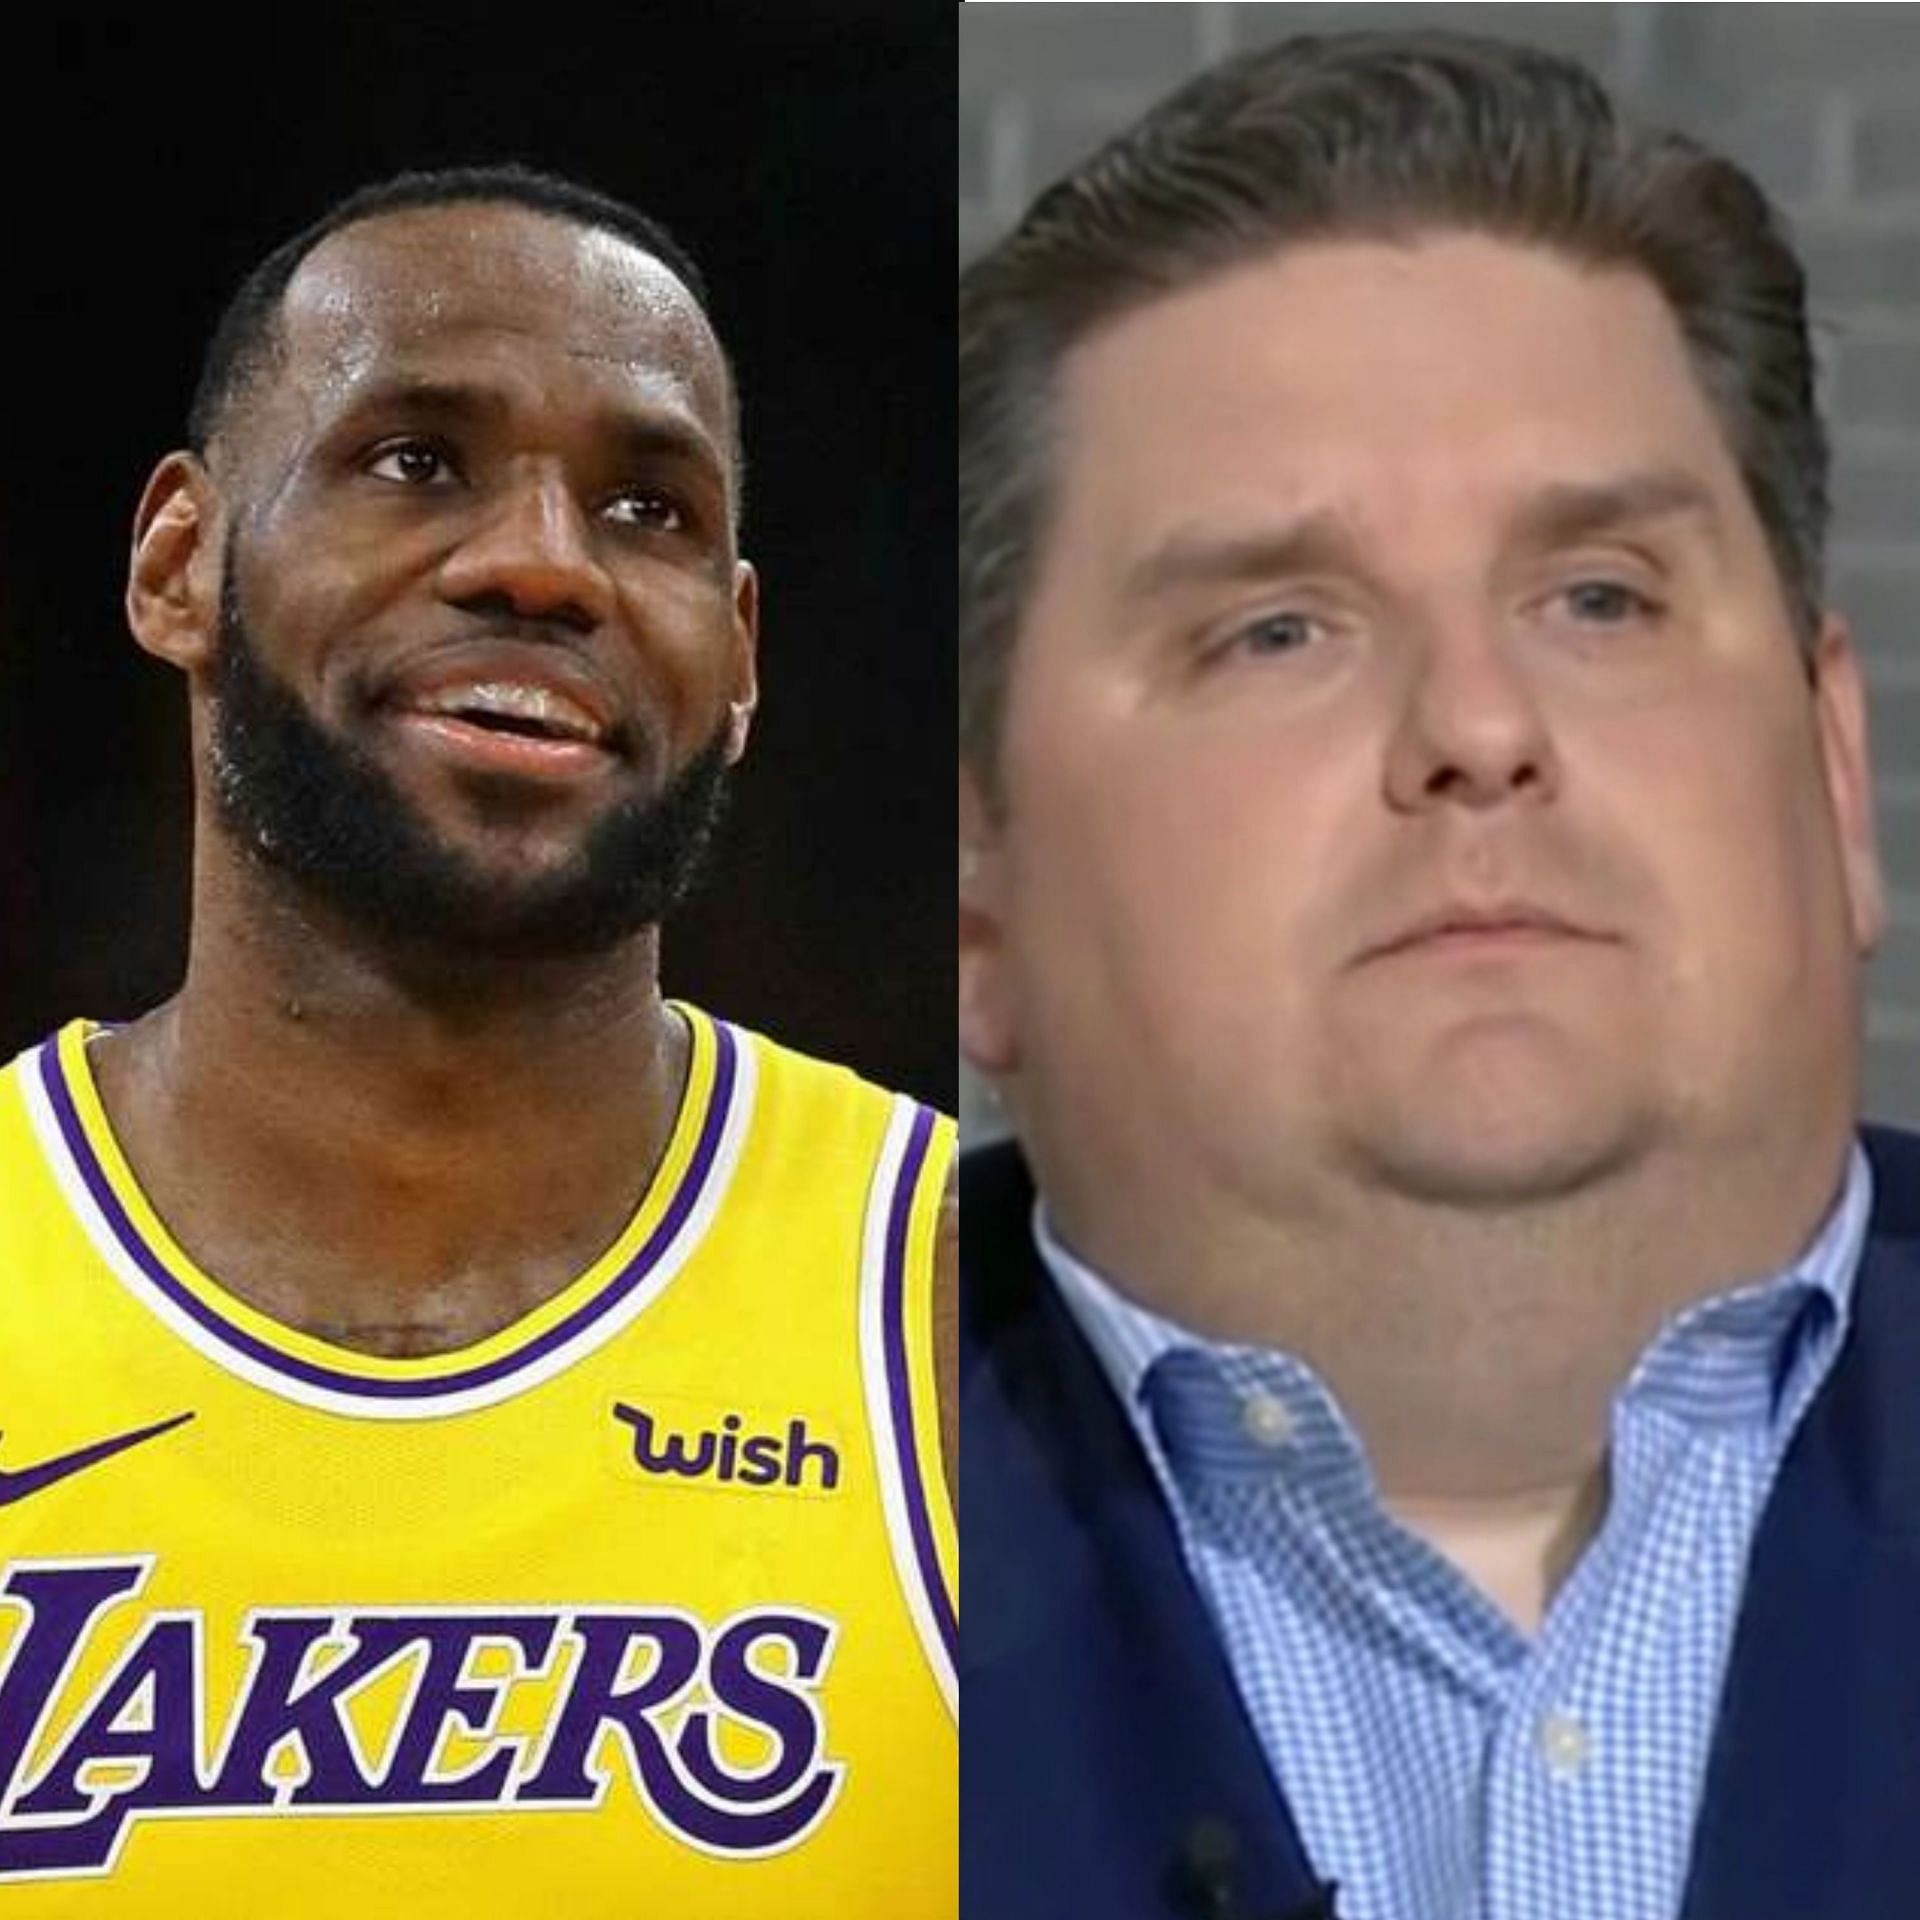 Brian Windhorst talked about his relationship with LeBron James